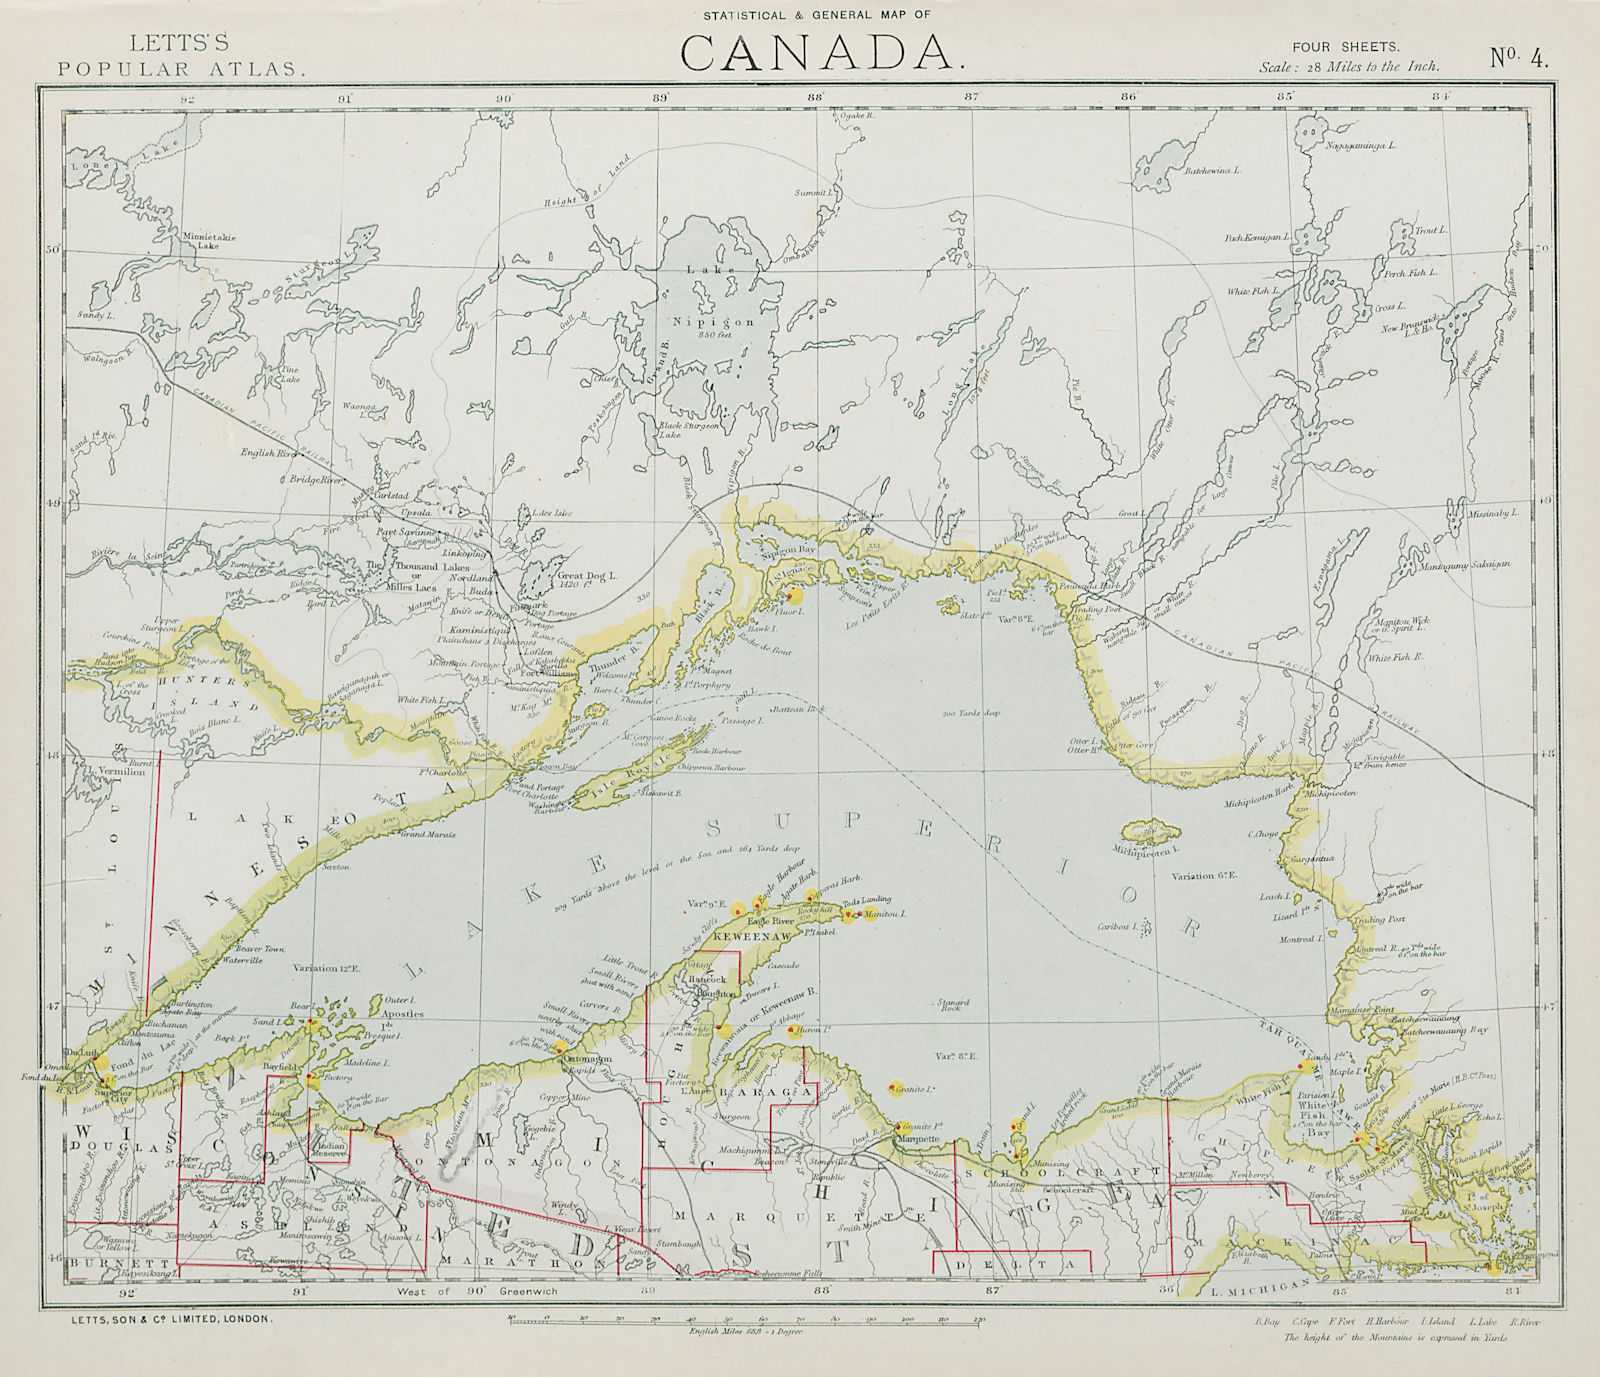 Associate Product LAKE SUPERIOR. Canada Ontario Michigan. Lighthouses & Railroads. LETTS 1884 map